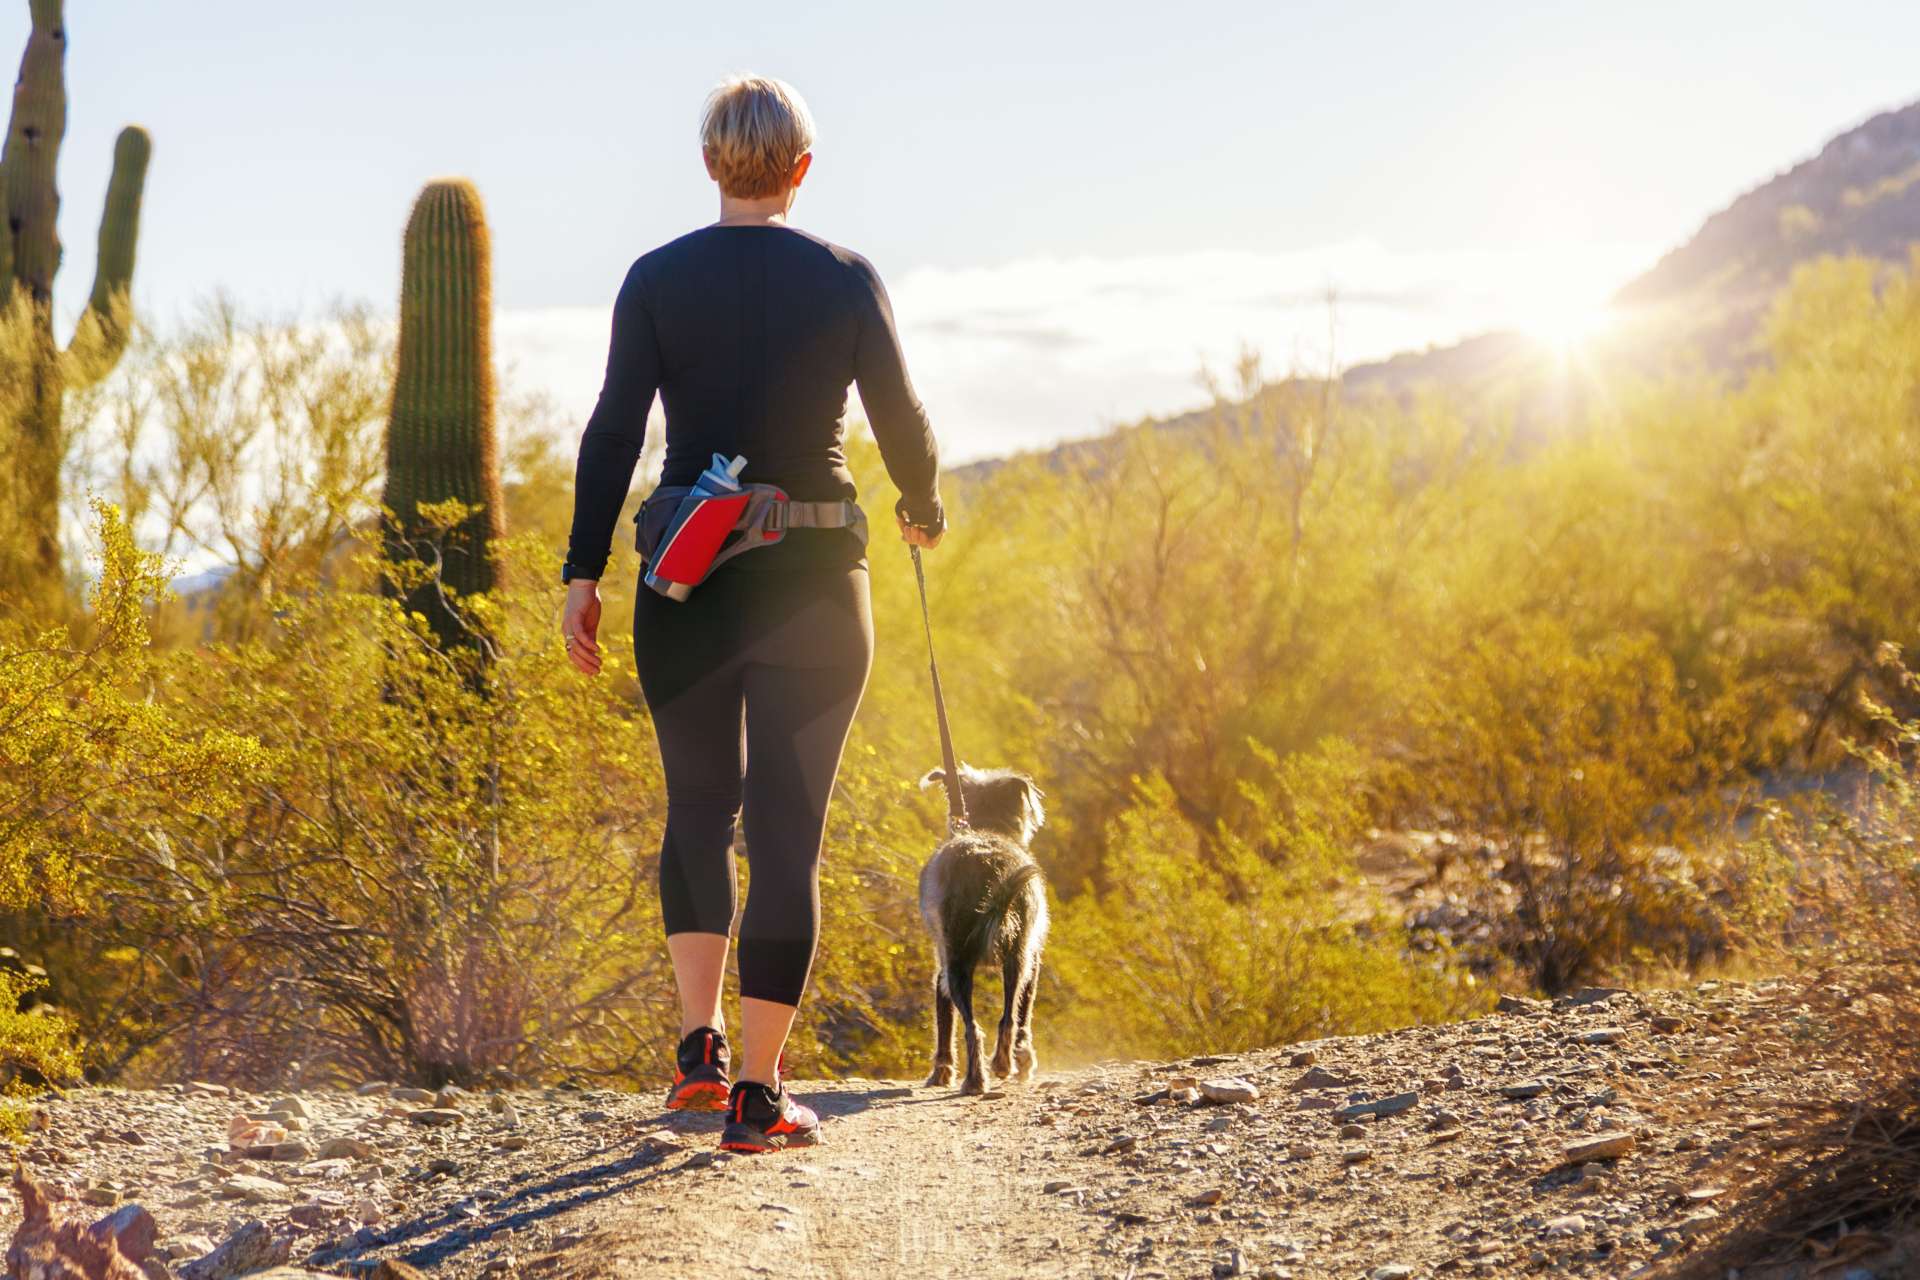 How to Exercise in Phoenix While Also Social Distancing | UrbanMatter  Phoenix